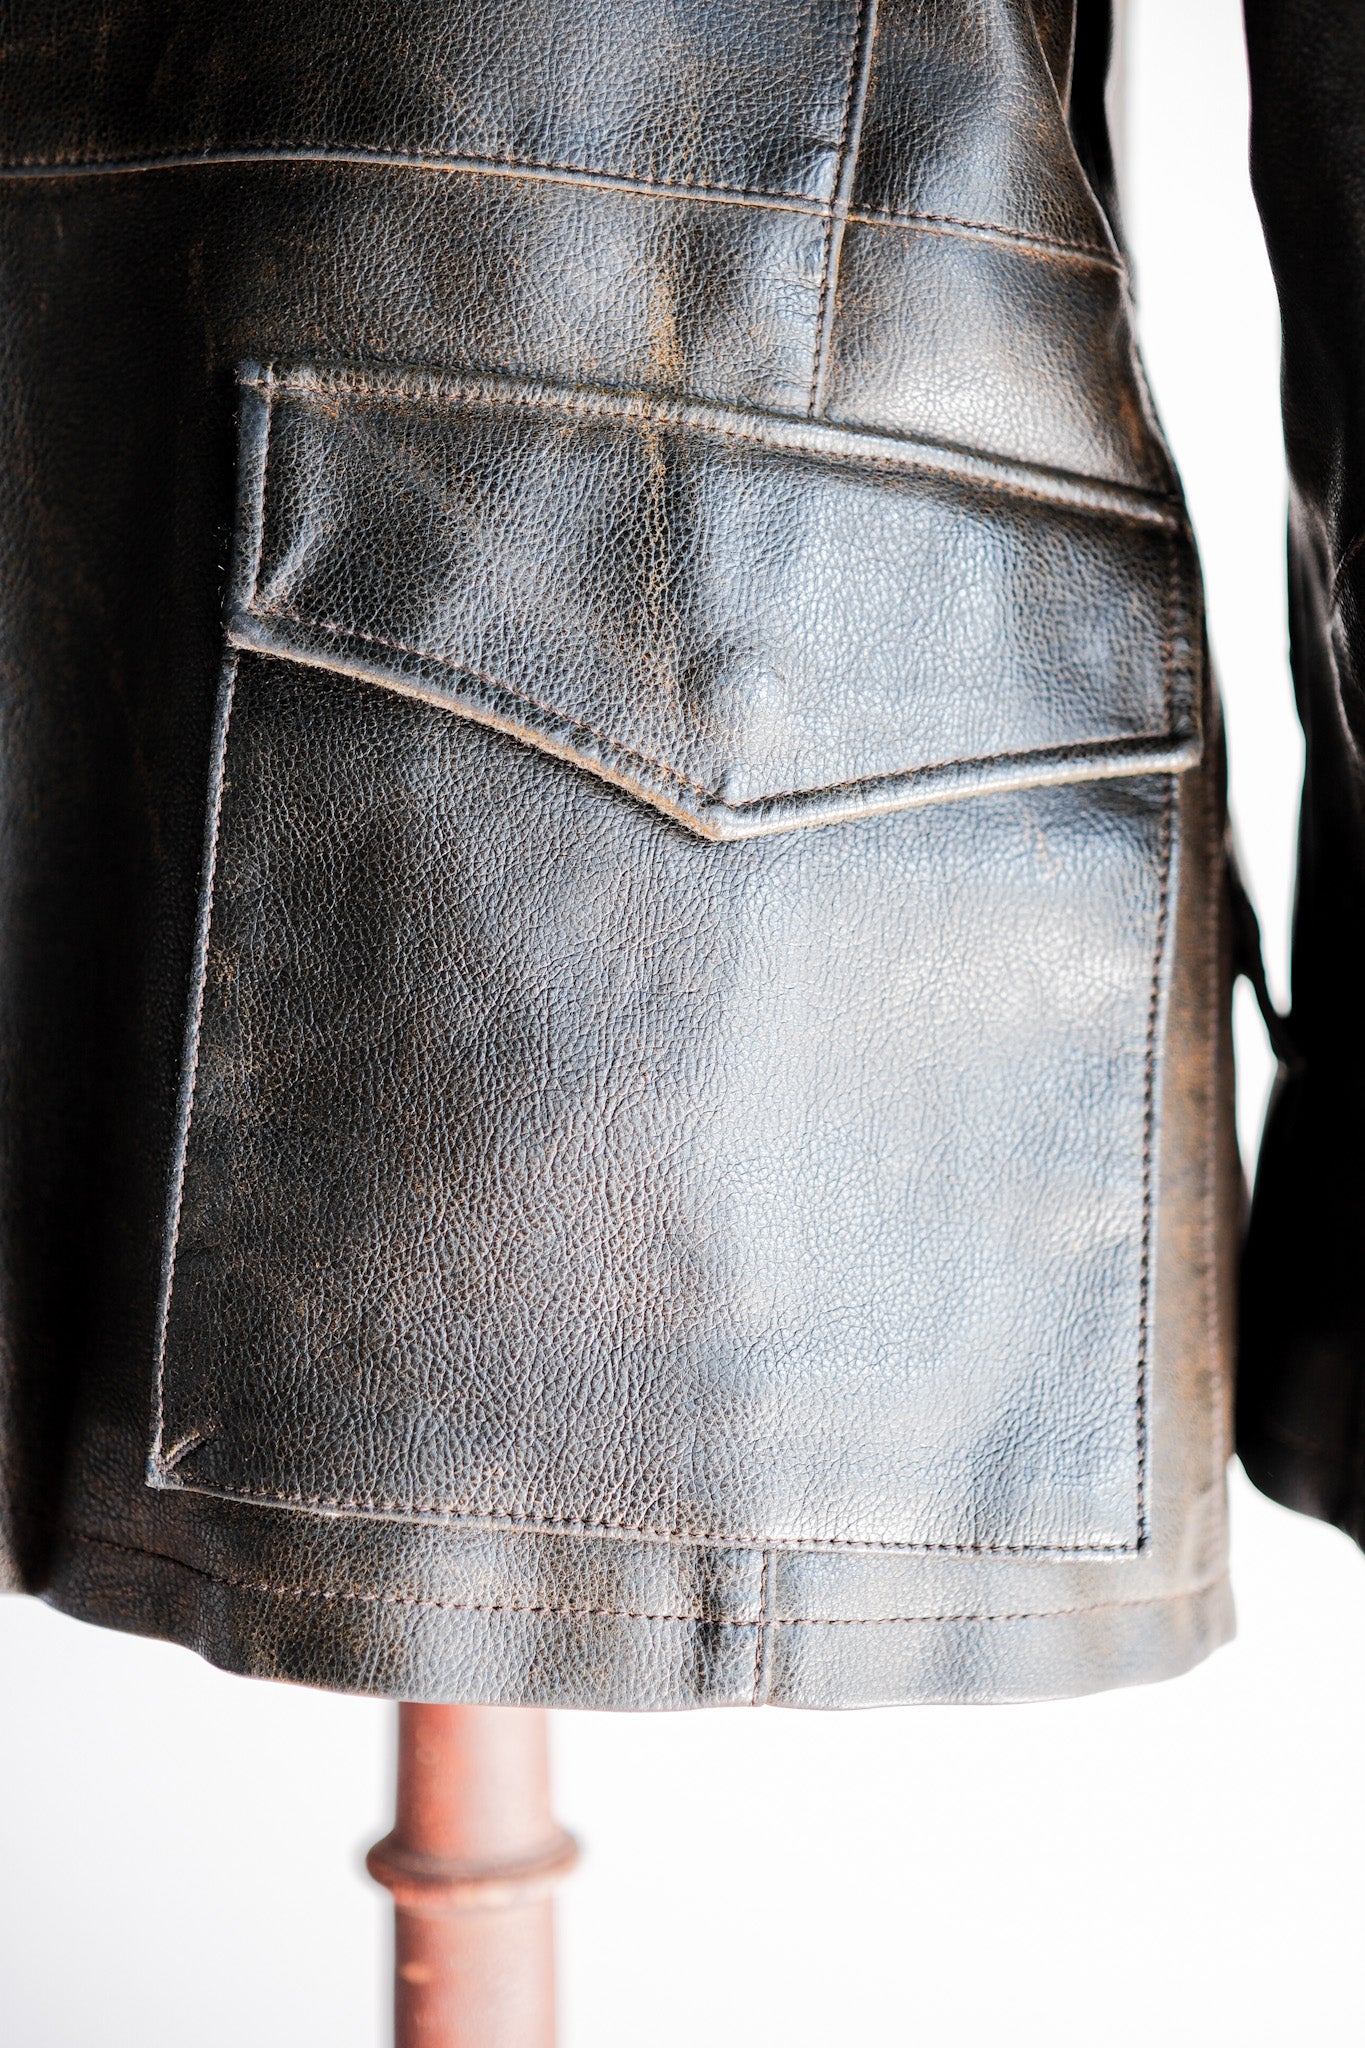 【~90’s】Old ARMANI JEANS M-59 Type PVC Leather Jacket